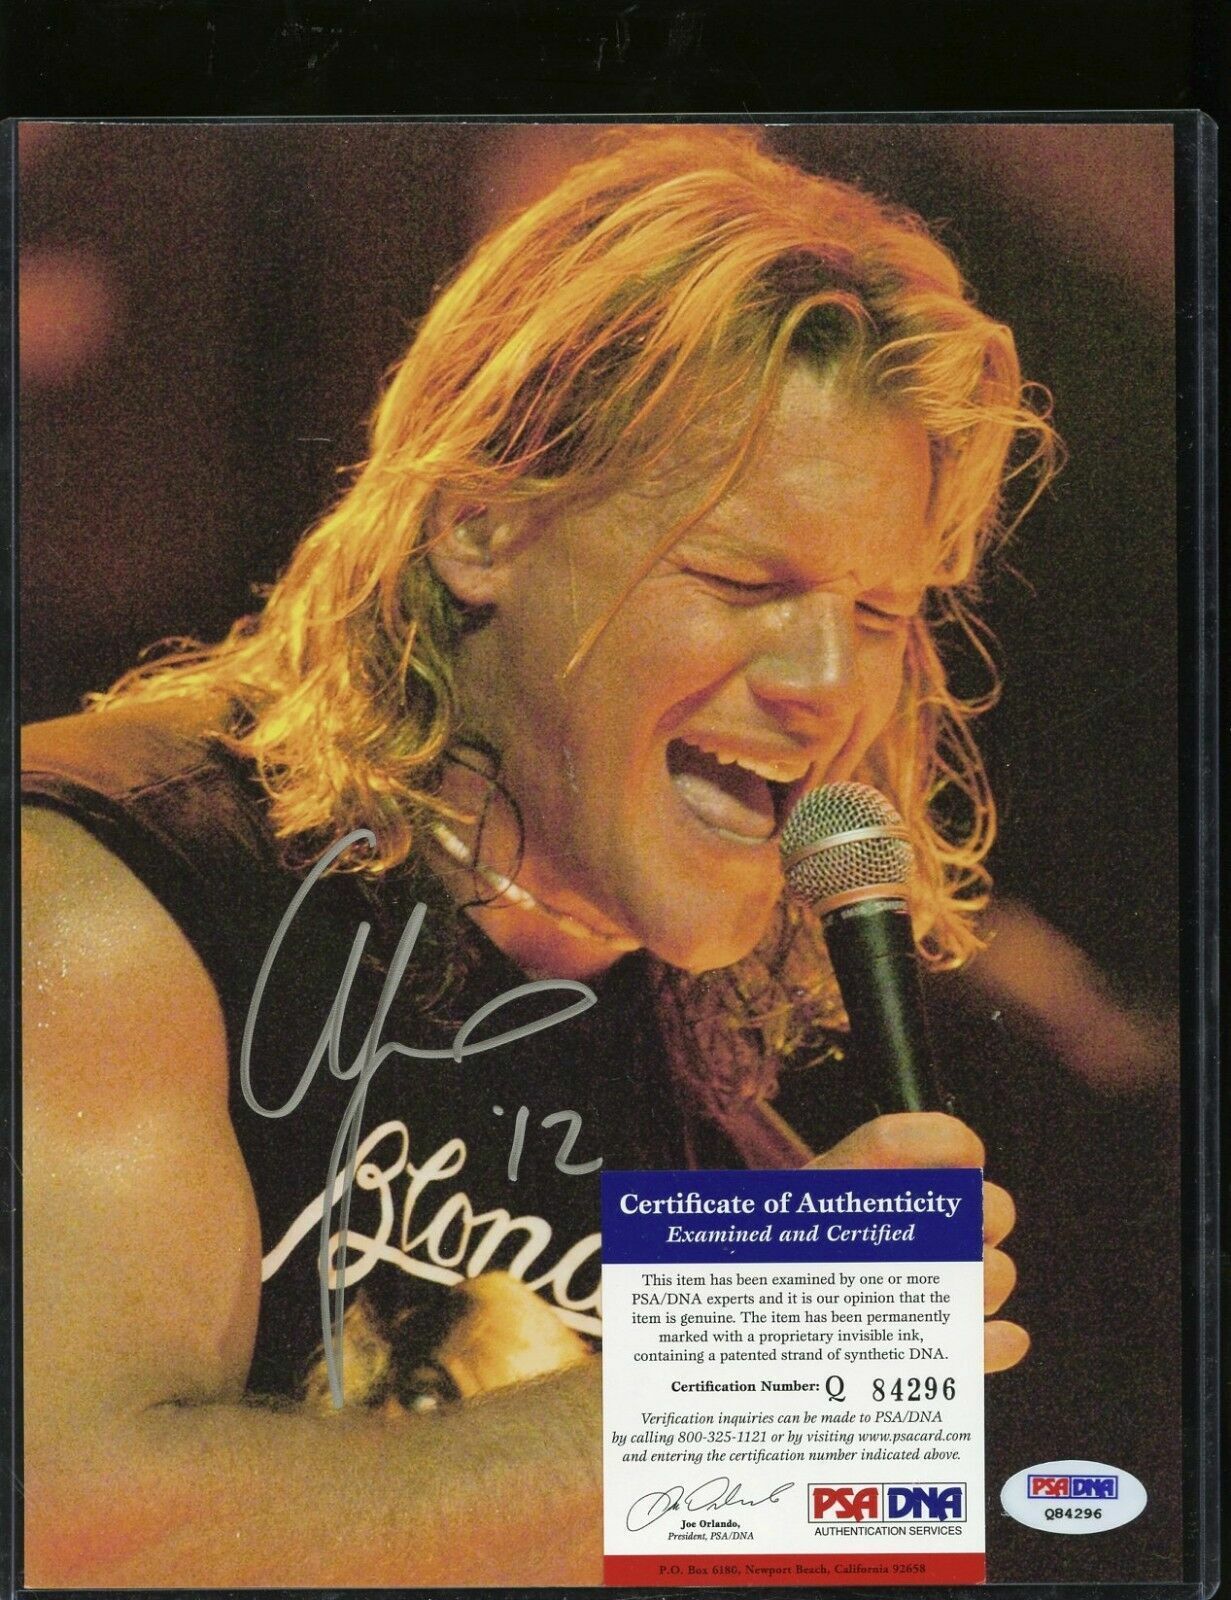 Chris Jericho in Fozzy signed 8x10 autographed Photo Poster painting AEW / WWE PSA COA (A)